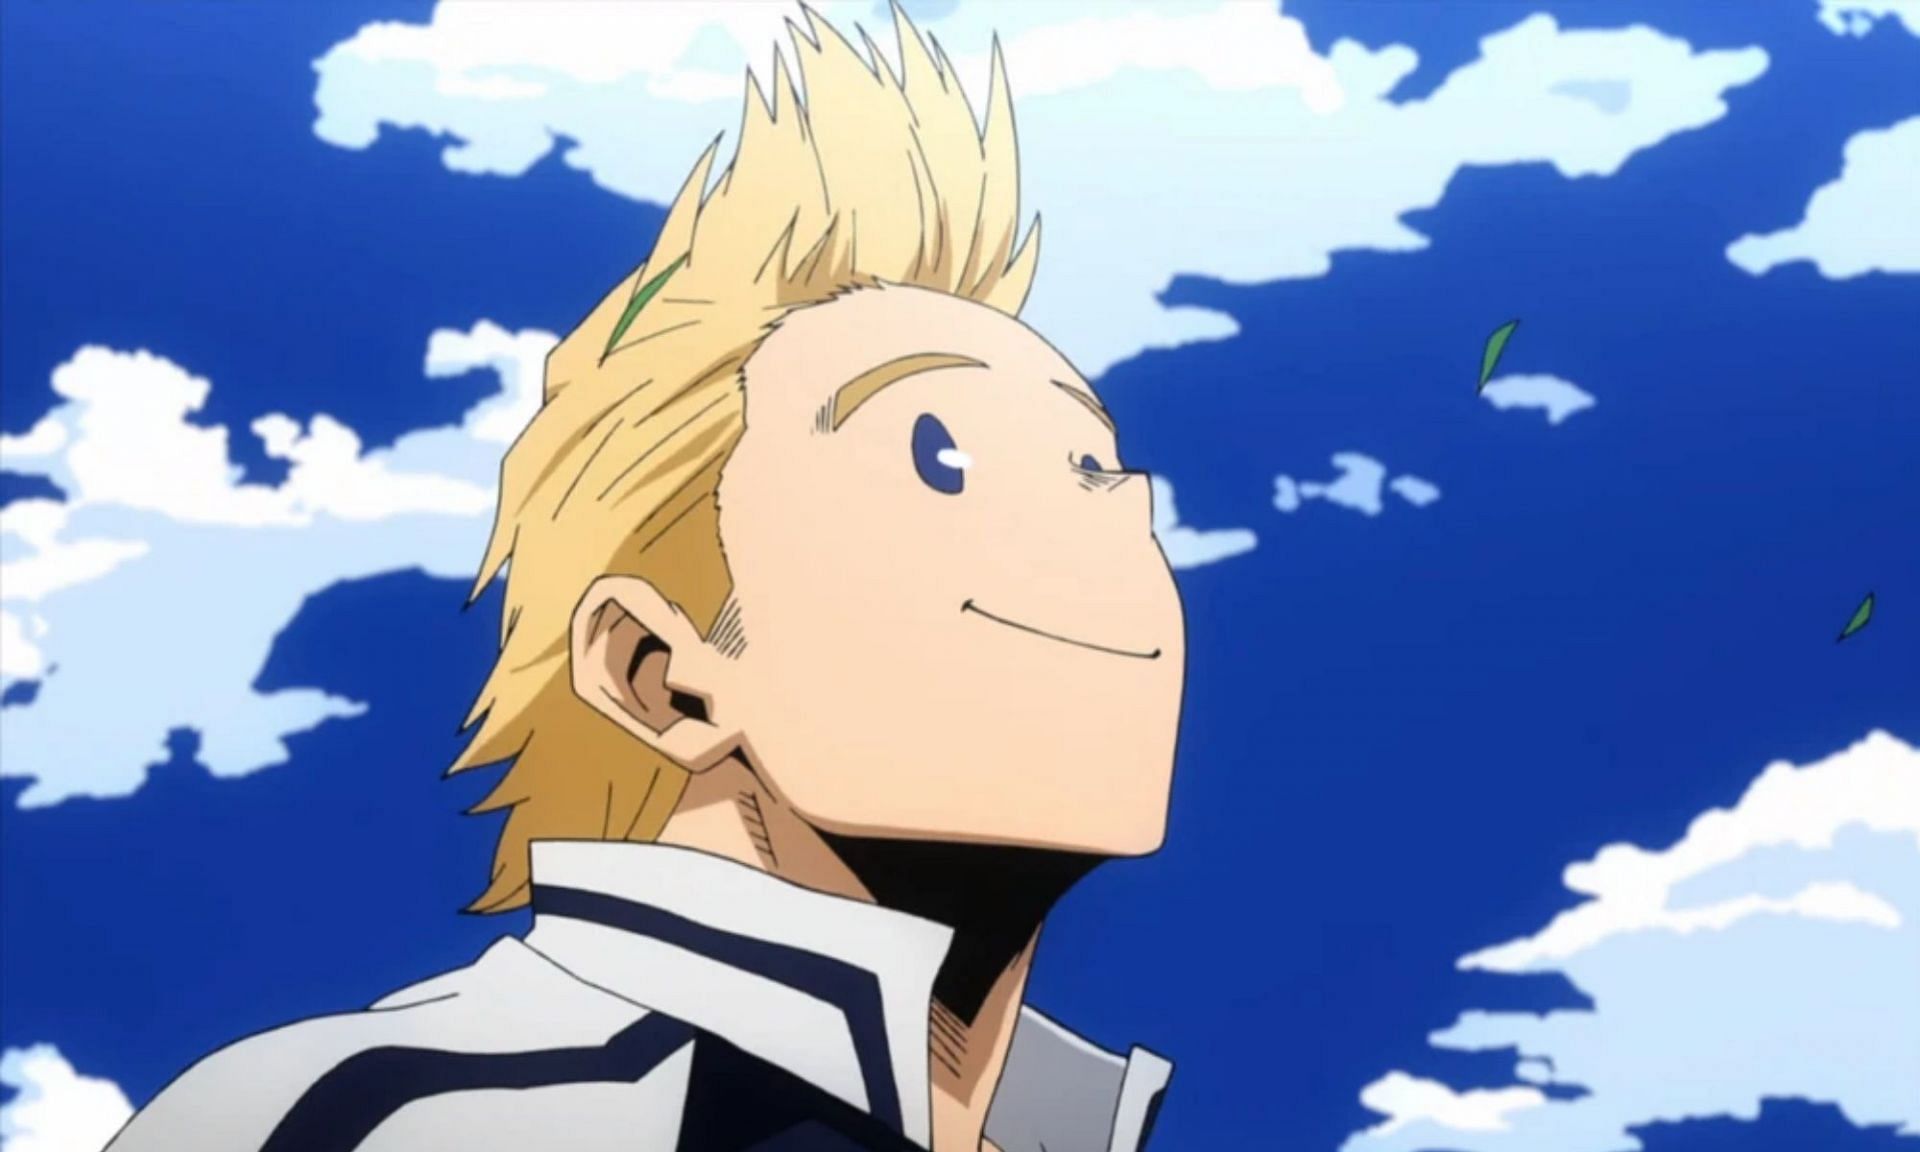 Mirio never counted himself out